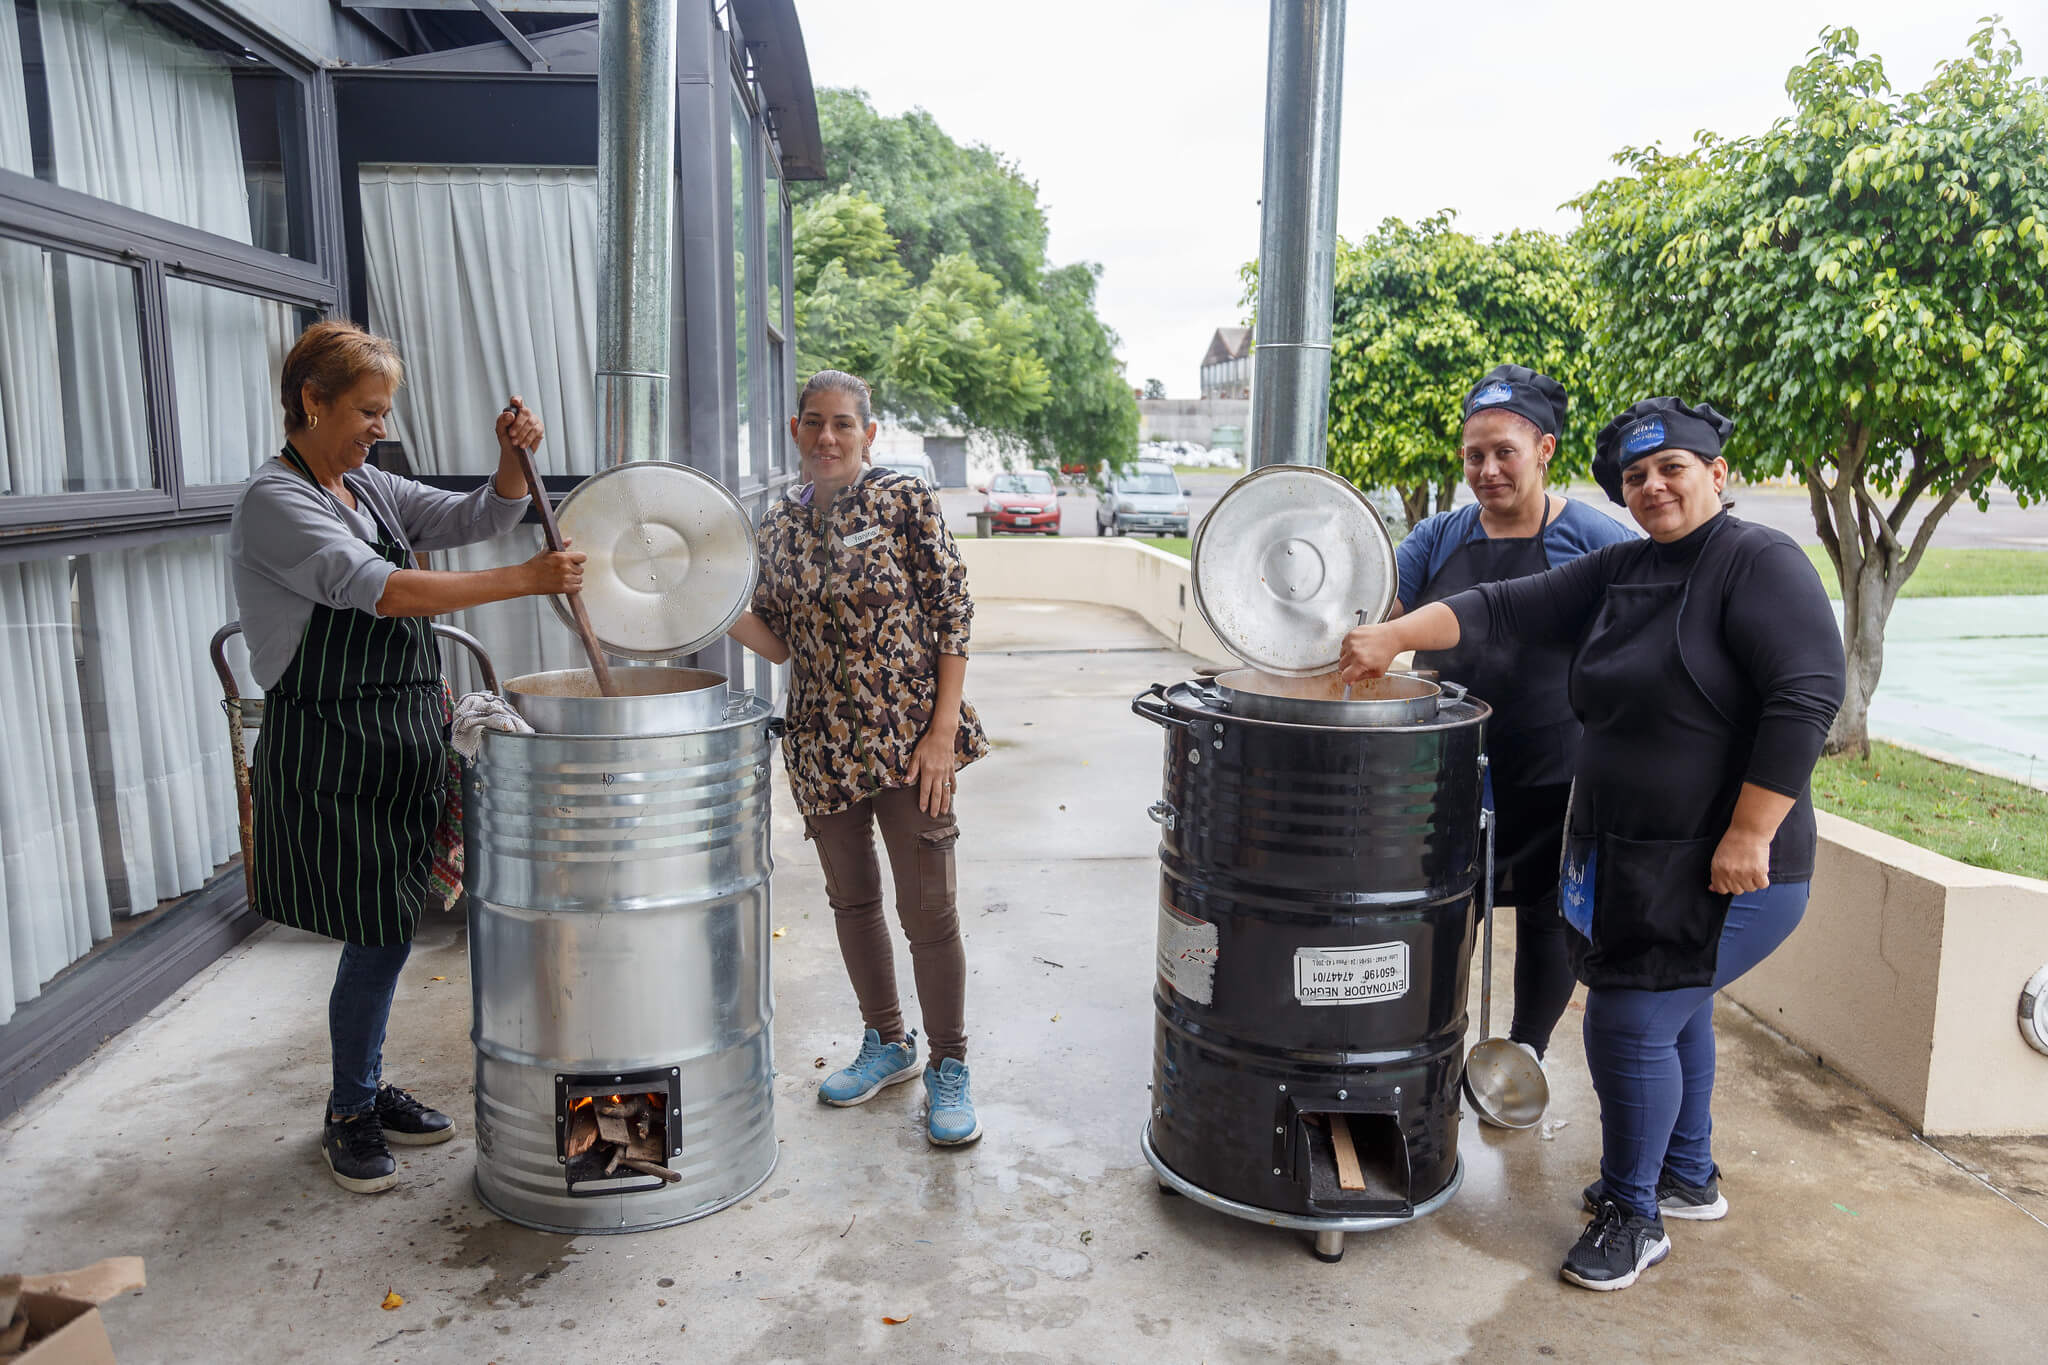 Efficient wood-burning stoves for community soup kitchens in the metropolitan area of Buenos Aires (AMBA)